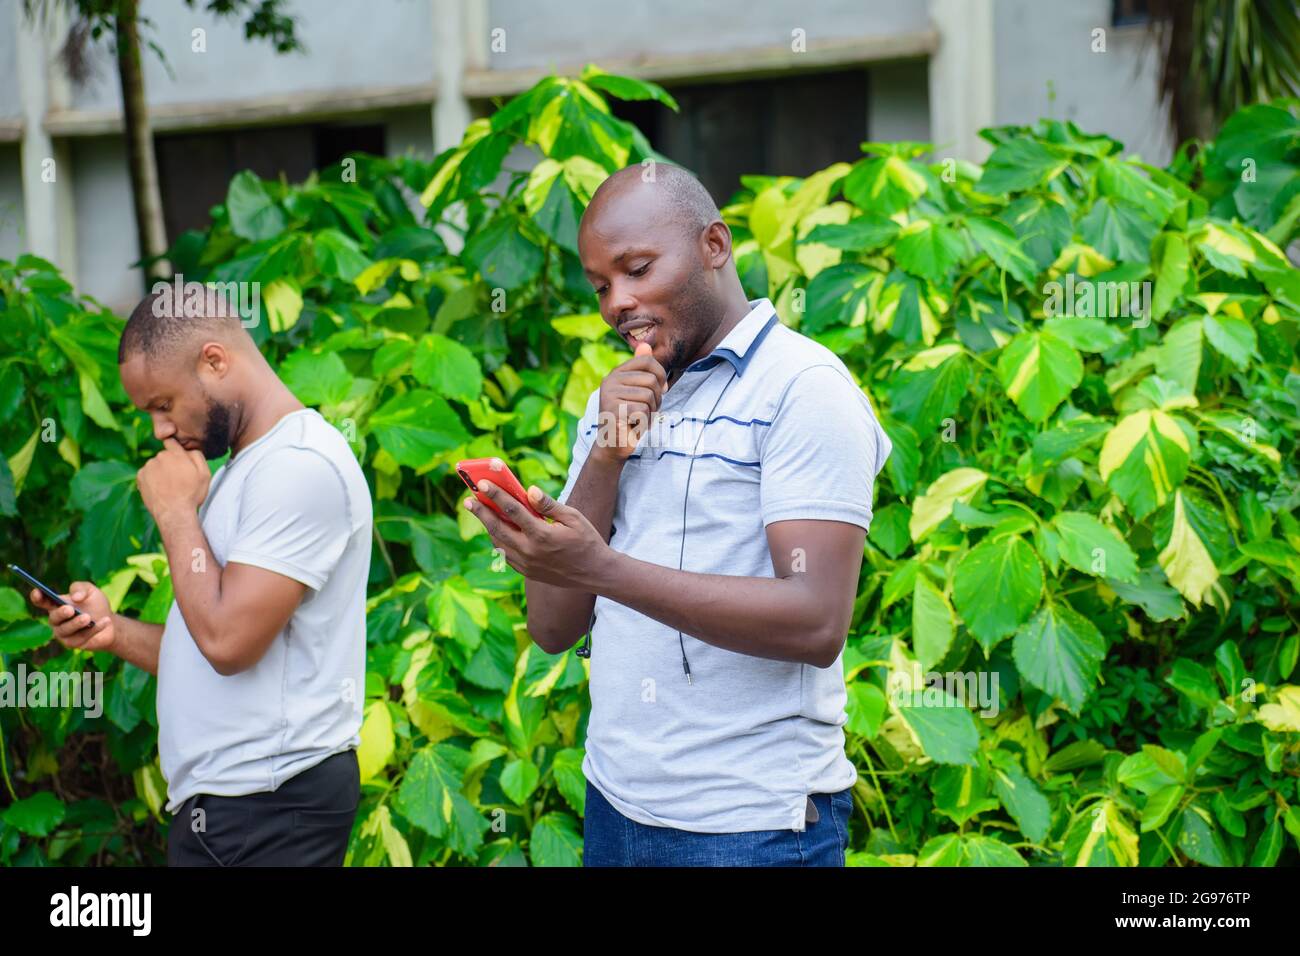 two African guys or men holding smart phones with different thoughtful and facial expression Stock Photo